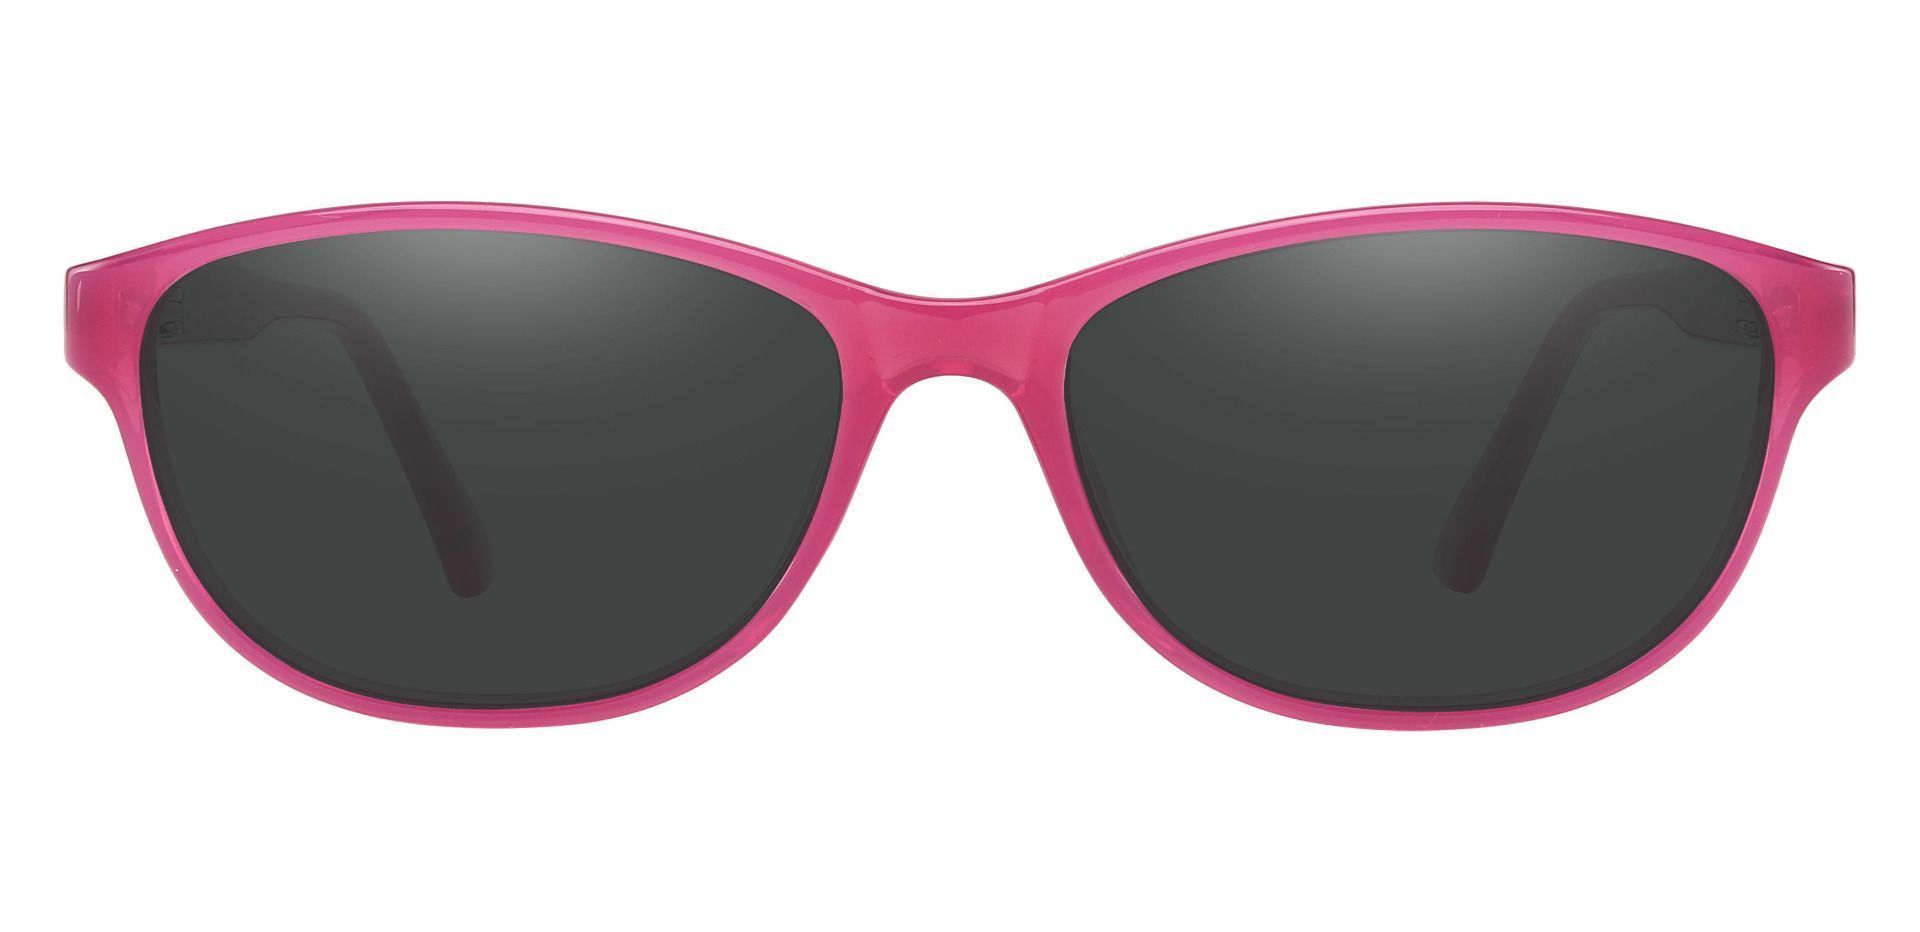 Patsy Oval Lined Bifocal Sunglasses - Pink Frame With Gray Lenses